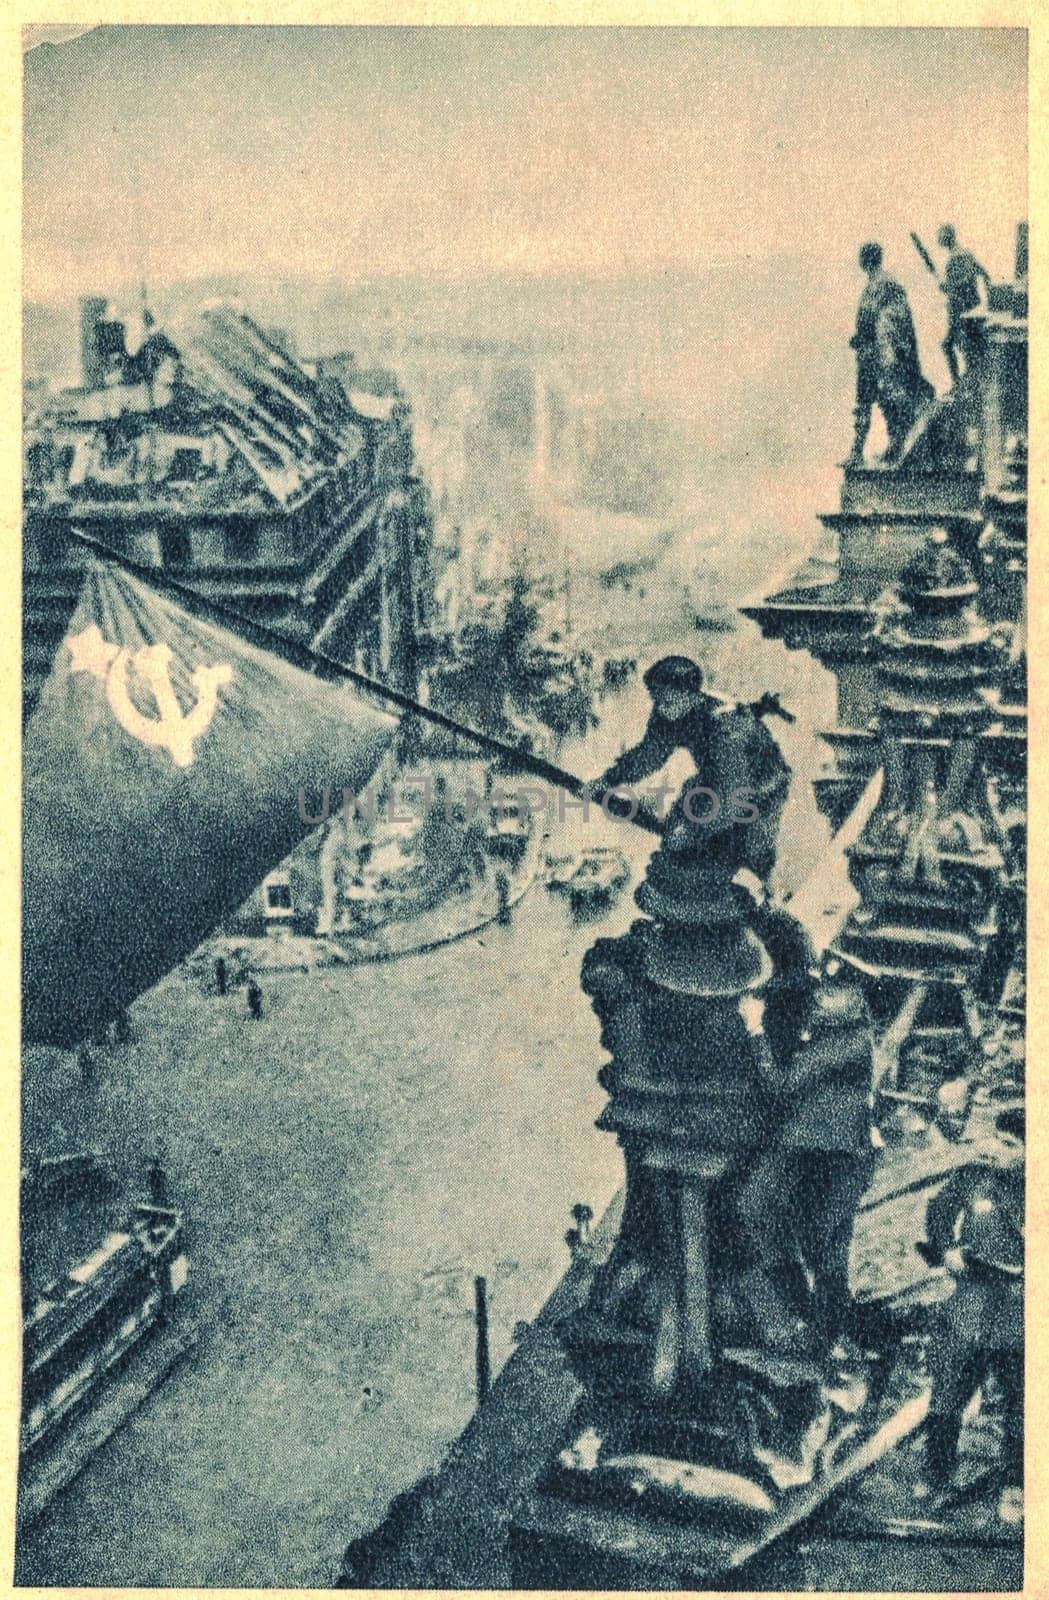 BERLIN, GERMANY - MAY 2, 1945: Raising a Flag over the Reichstag, a photograph taken during the Battle of Berlin on 2 May 1945